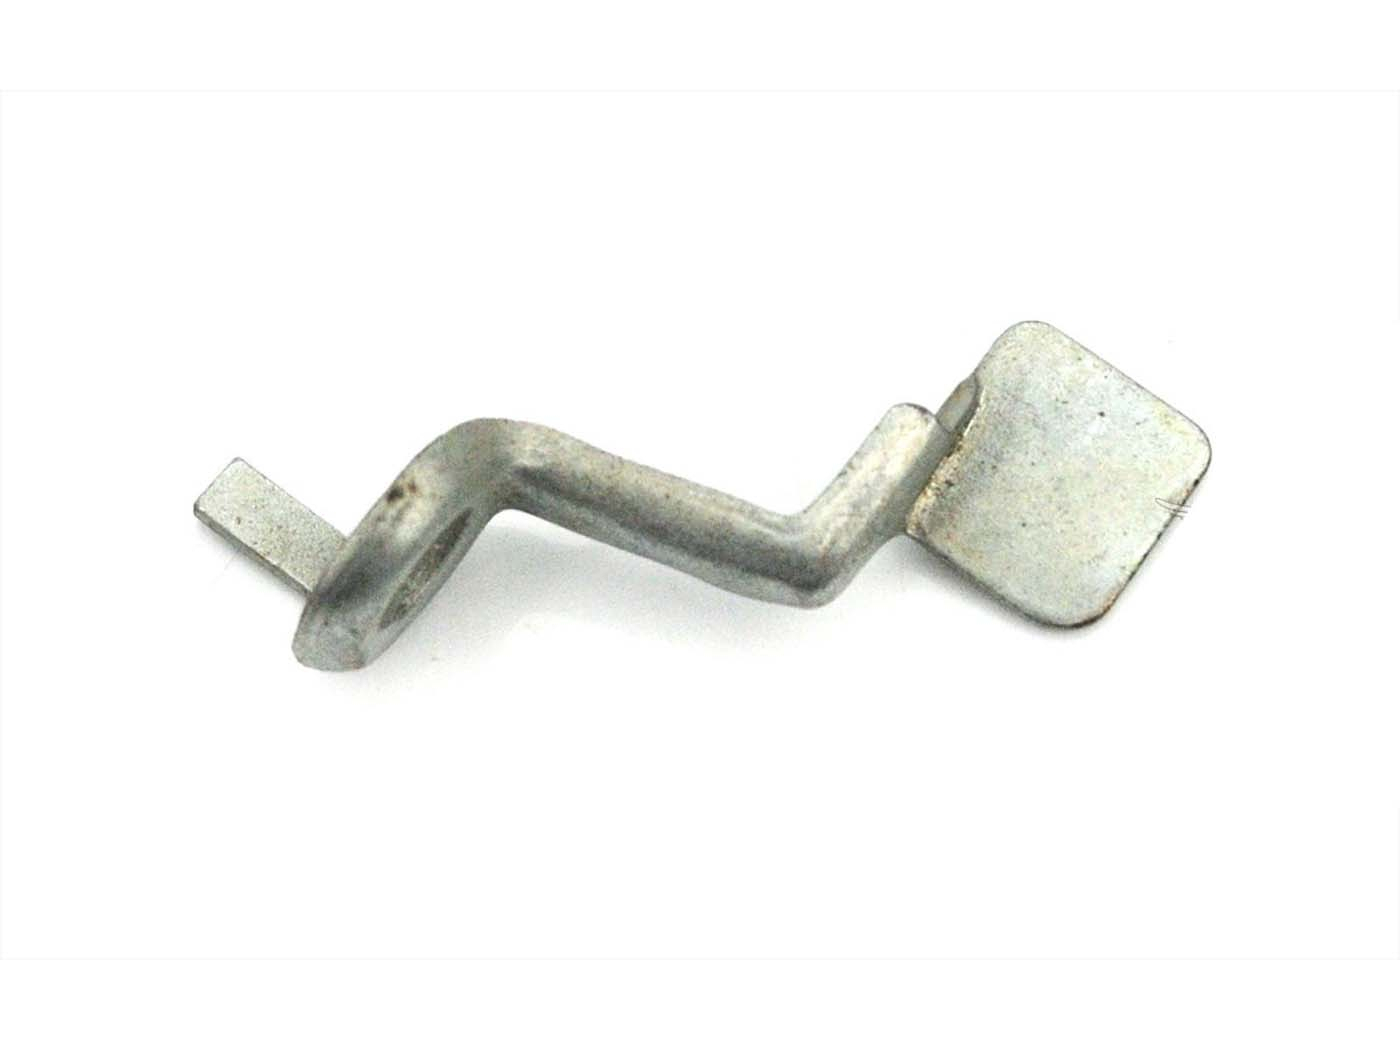 Shift Lever Magura For Sachs 50 3 Speed, DKW Hummel, Rex Victoria Vicky Gear